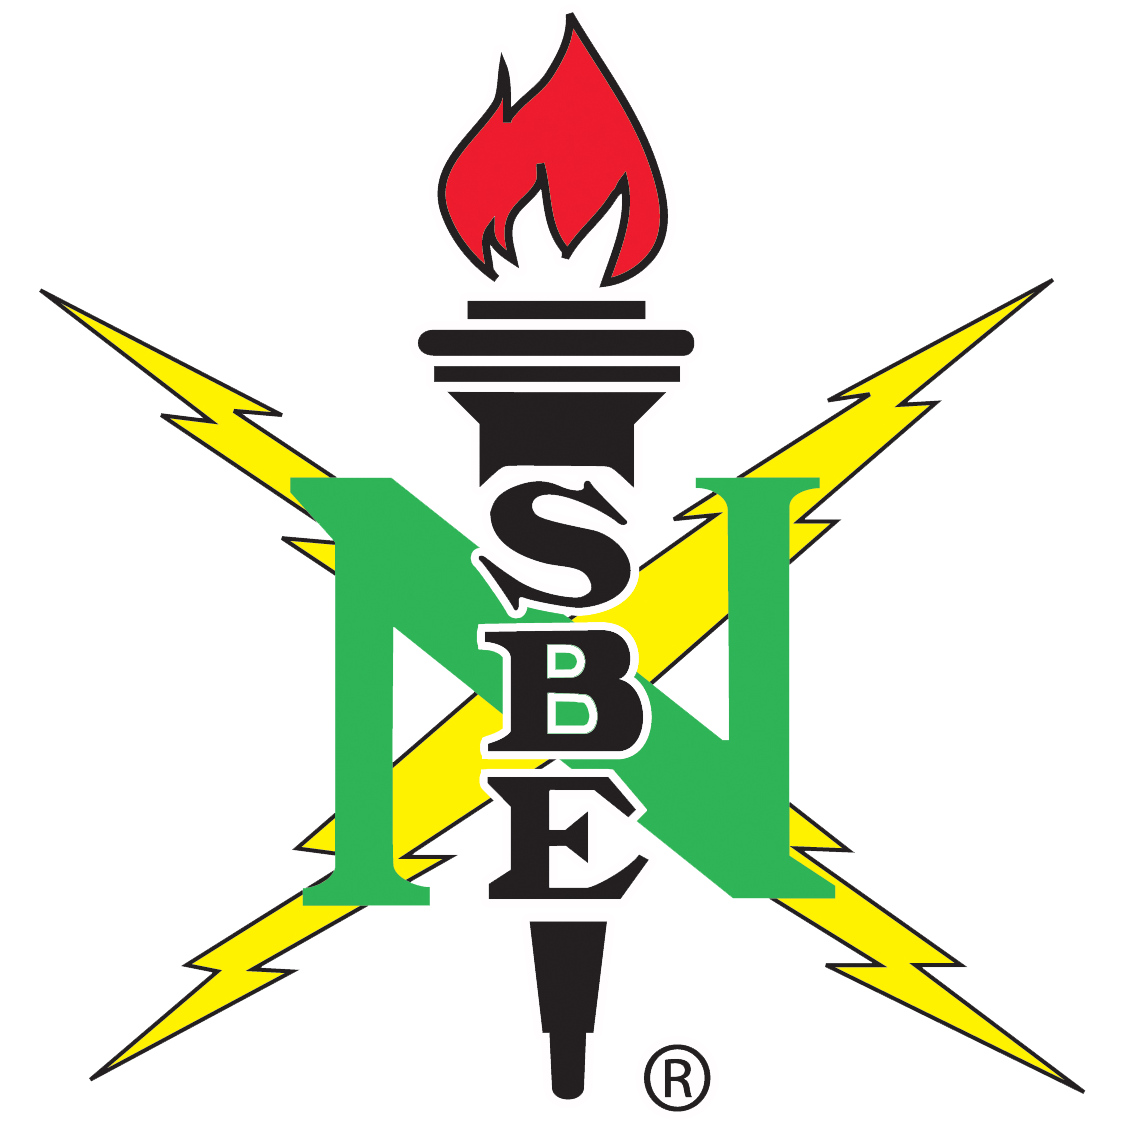 Contract clipart municipal engineer. National society of black